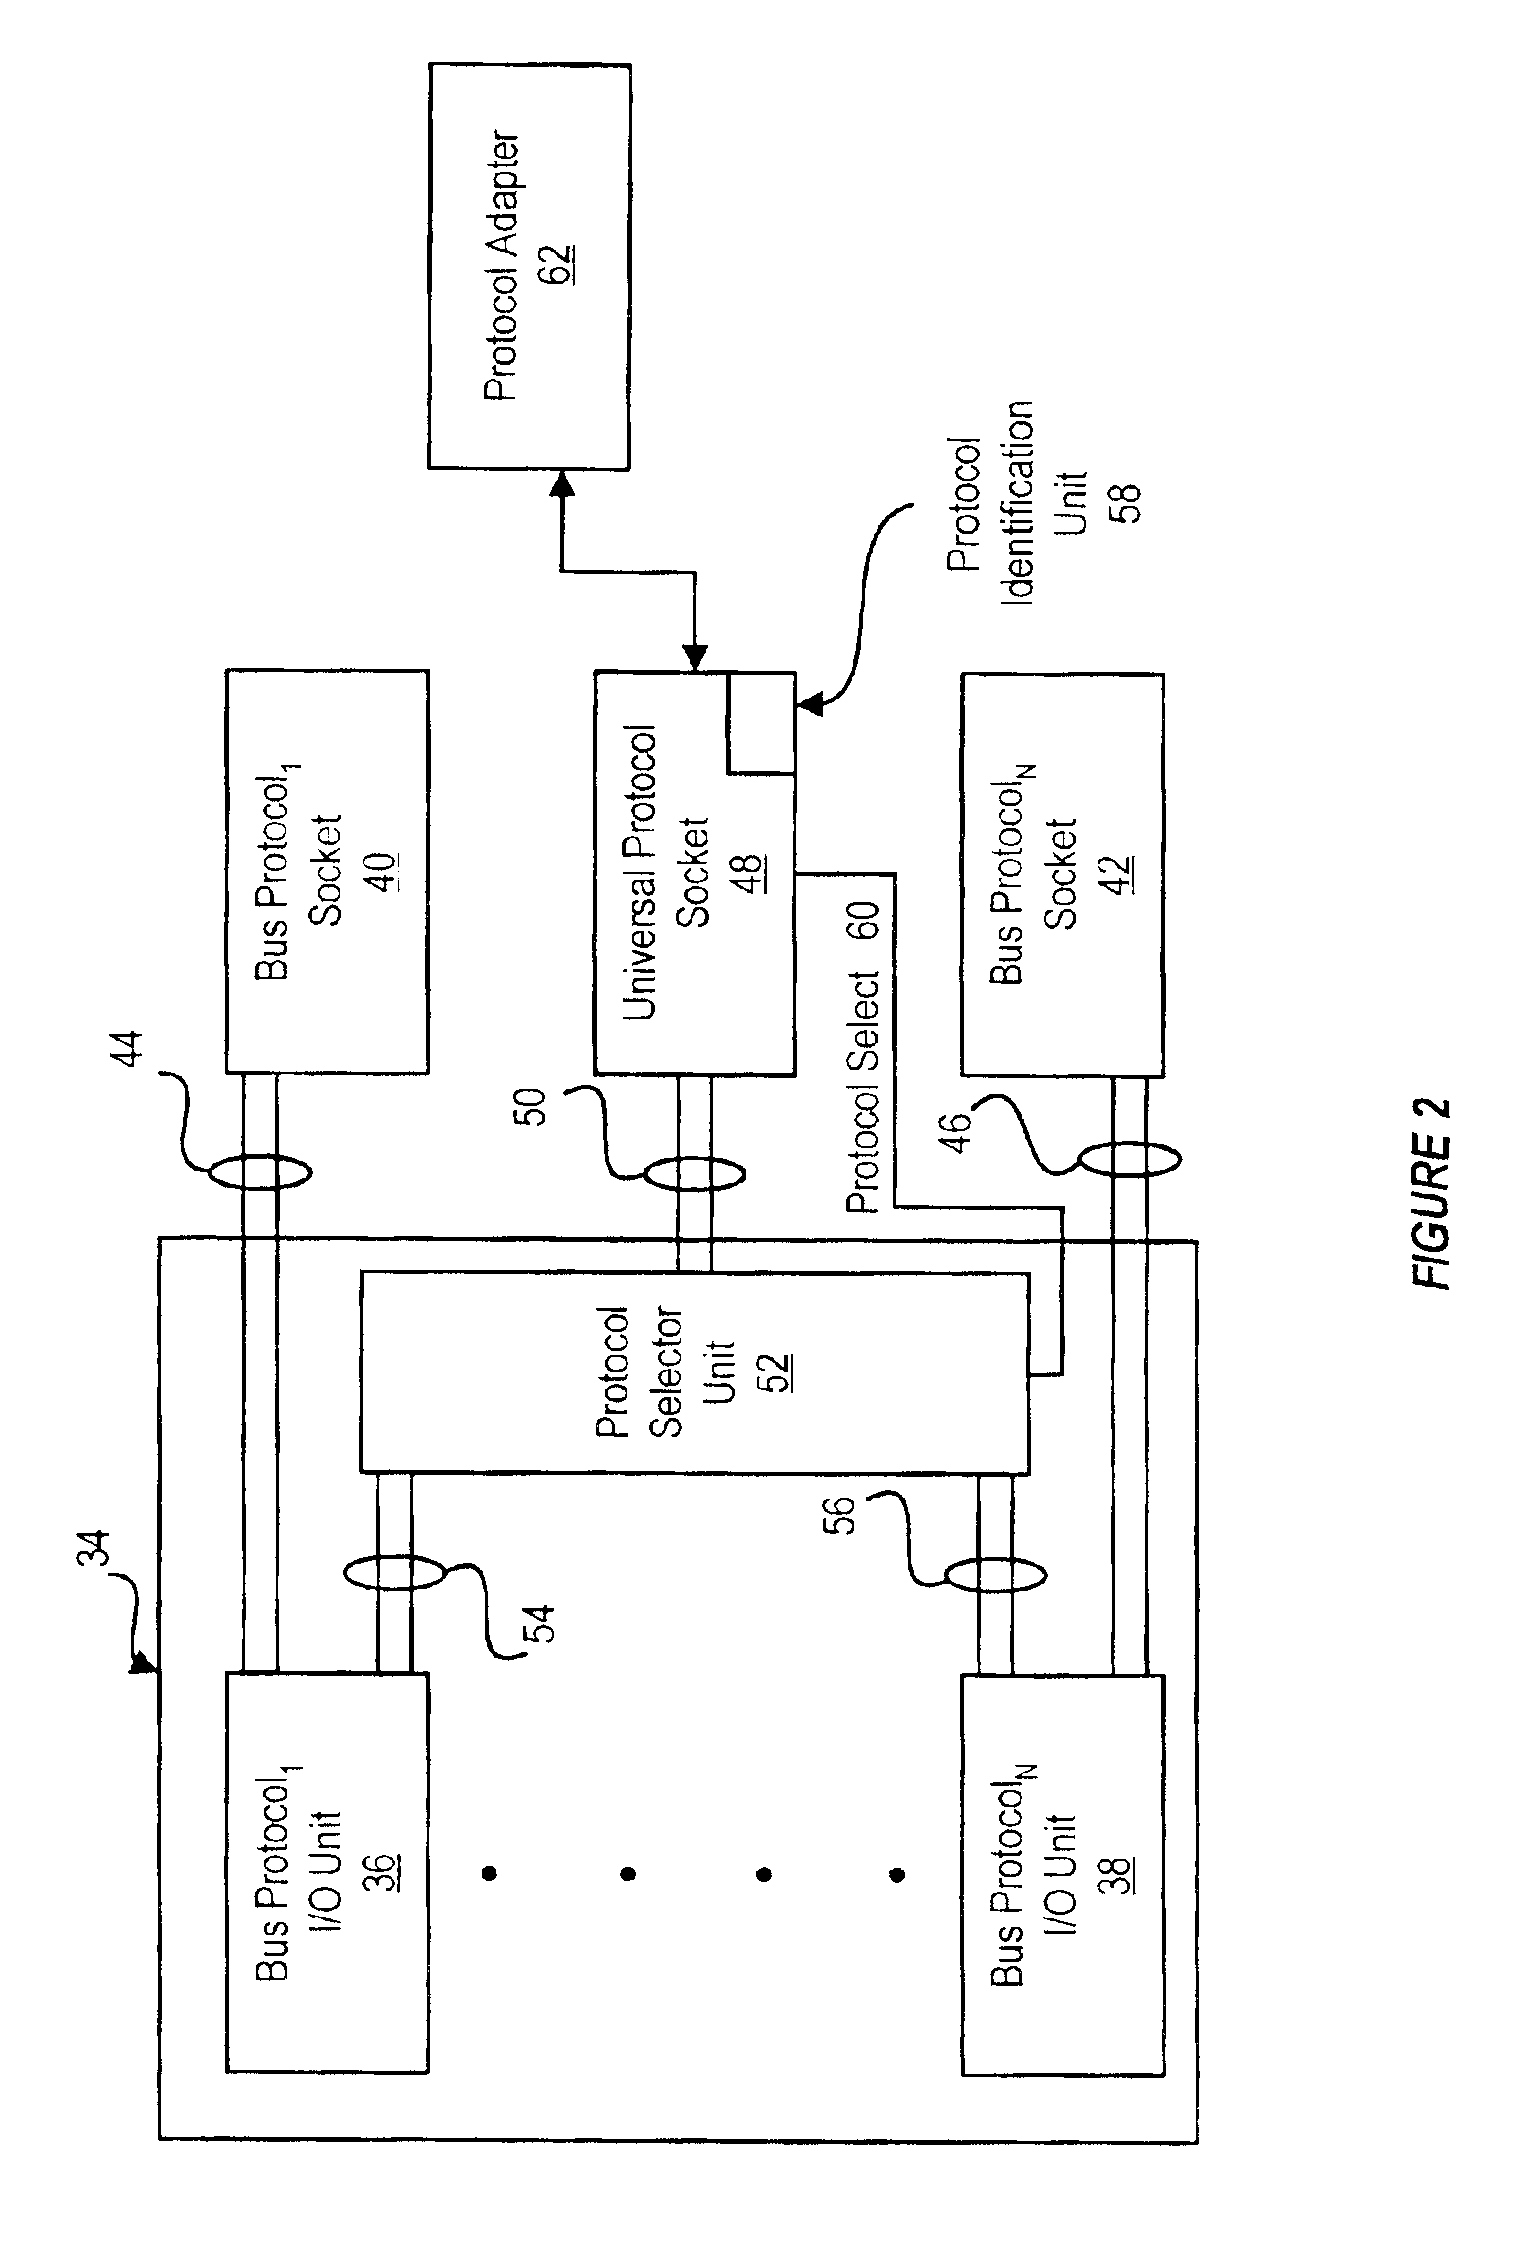 Method and system for supporting multiple bus protocols on a set of wirelines